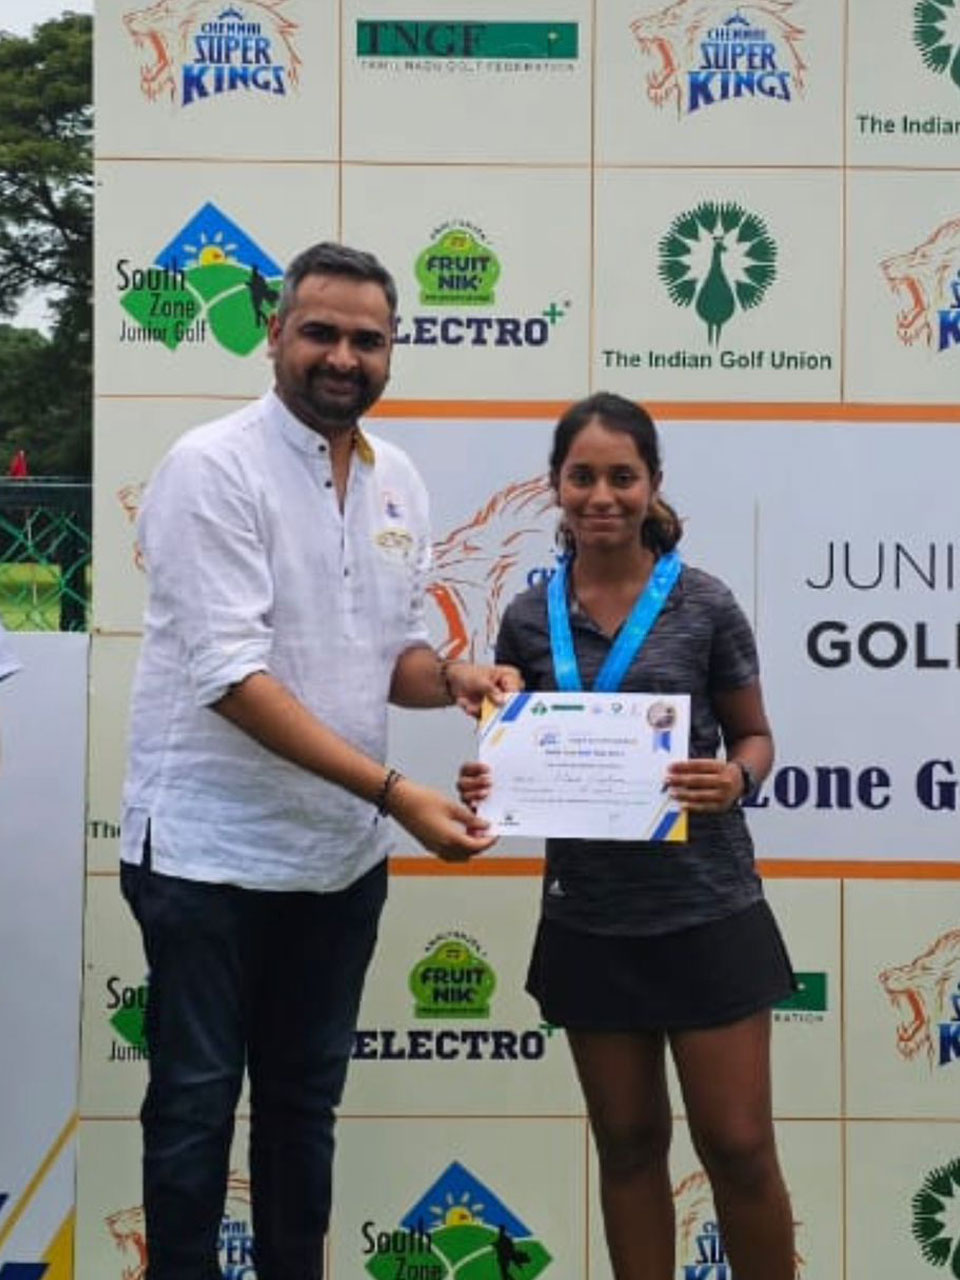 Manvi Singhania finished 2nd in Category B Girls